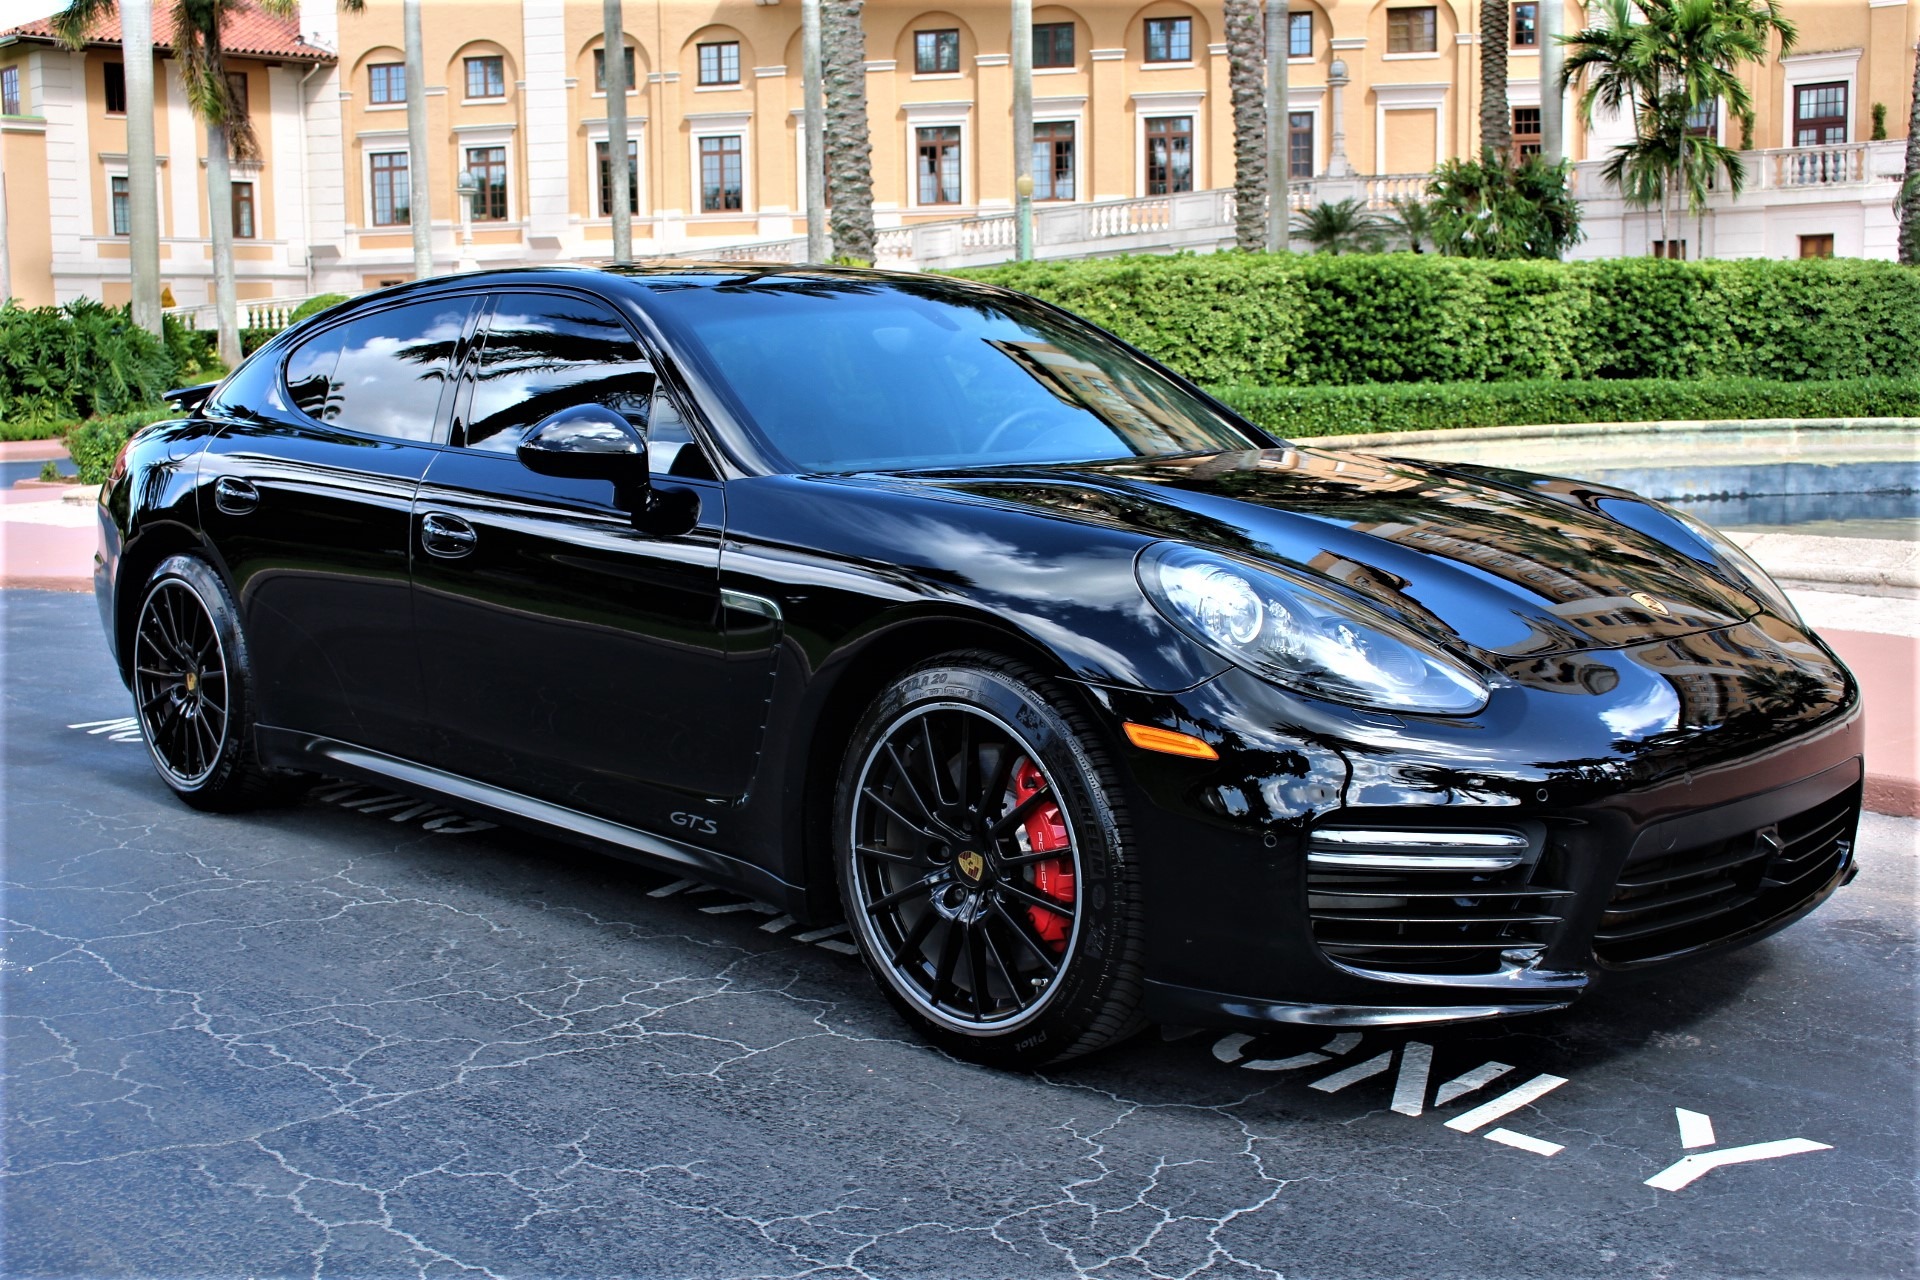 Used 2015 Porsche Panamera GTS for sale Sold at The Gables Sports Cars in Miami FL 33146 2